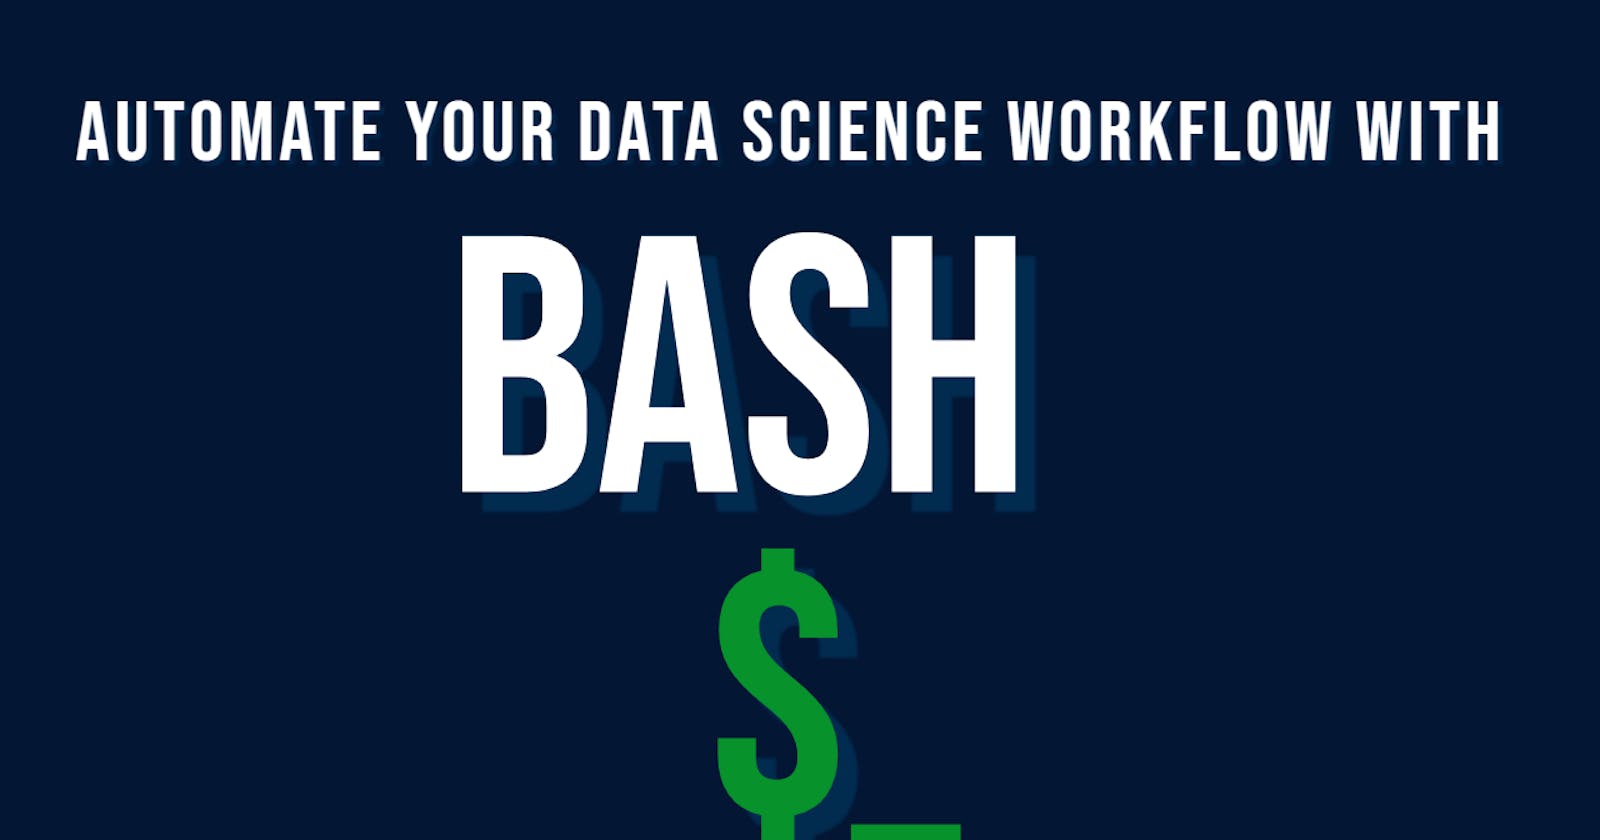 Automate your Data Science Workflow with Bash